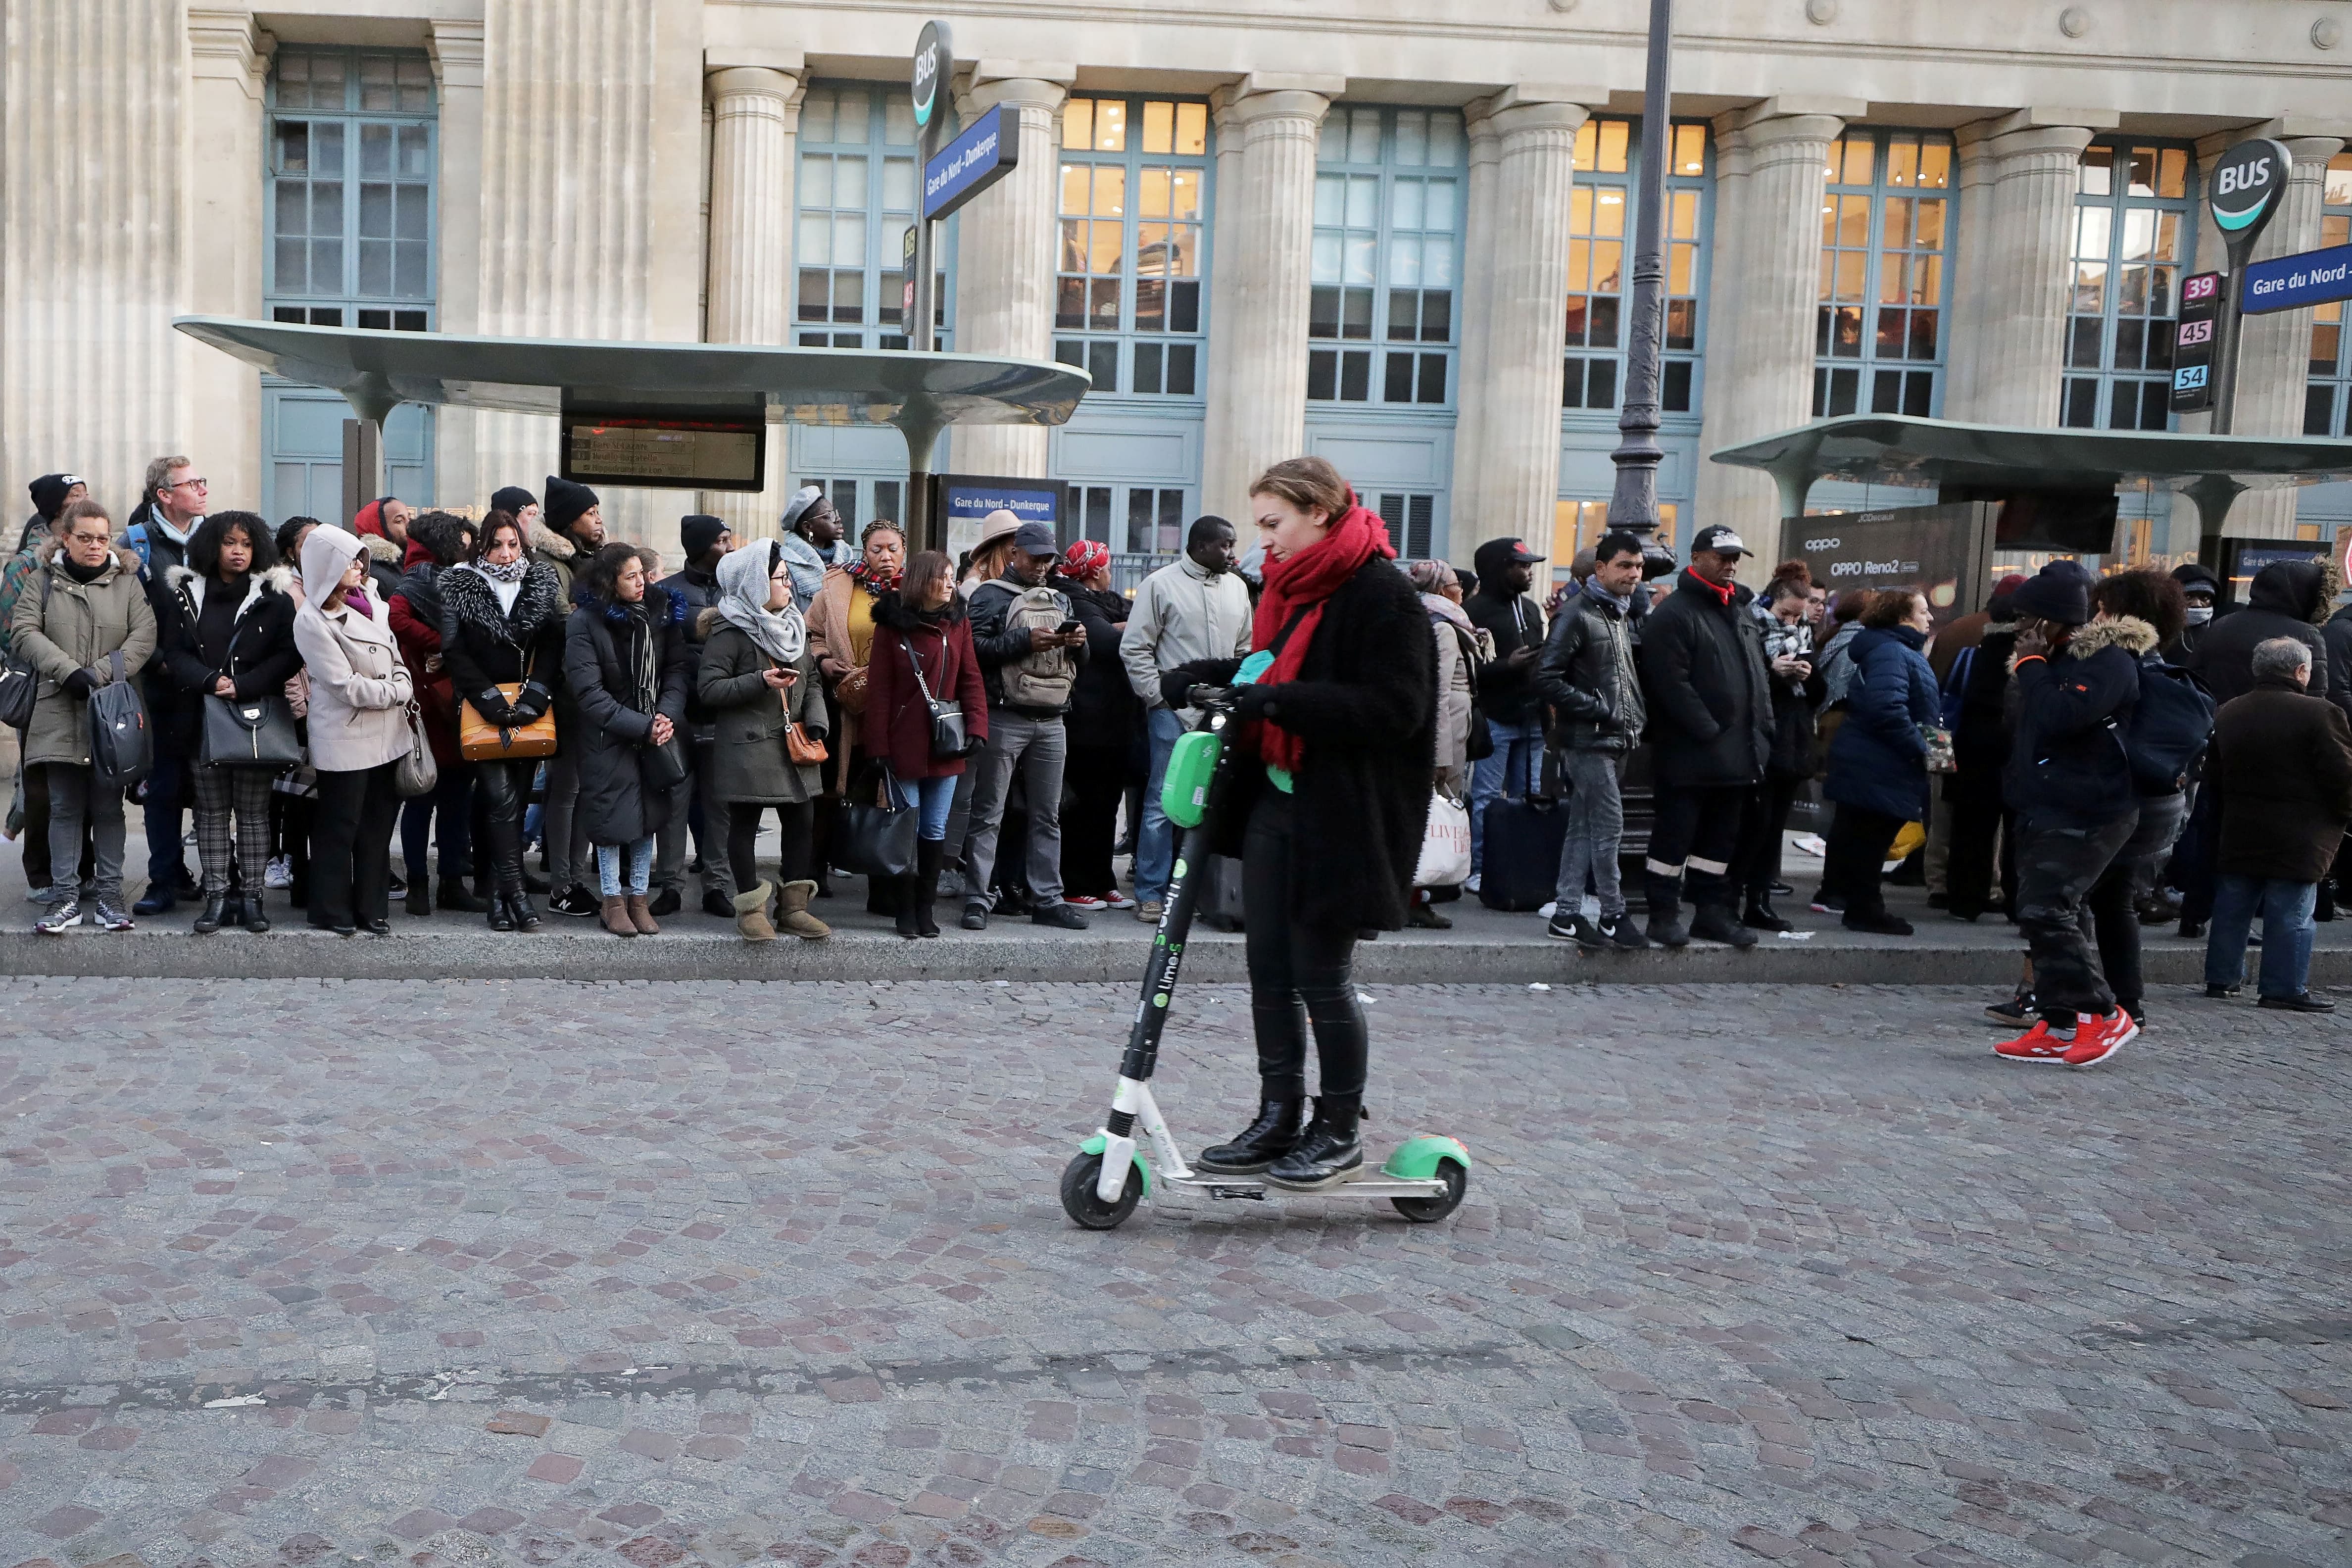 A woman rides a scooter past people waiting at bus stops at Gare du Nord station during strikes in Paris, France, December 10, 2019. (Reuters Photo)